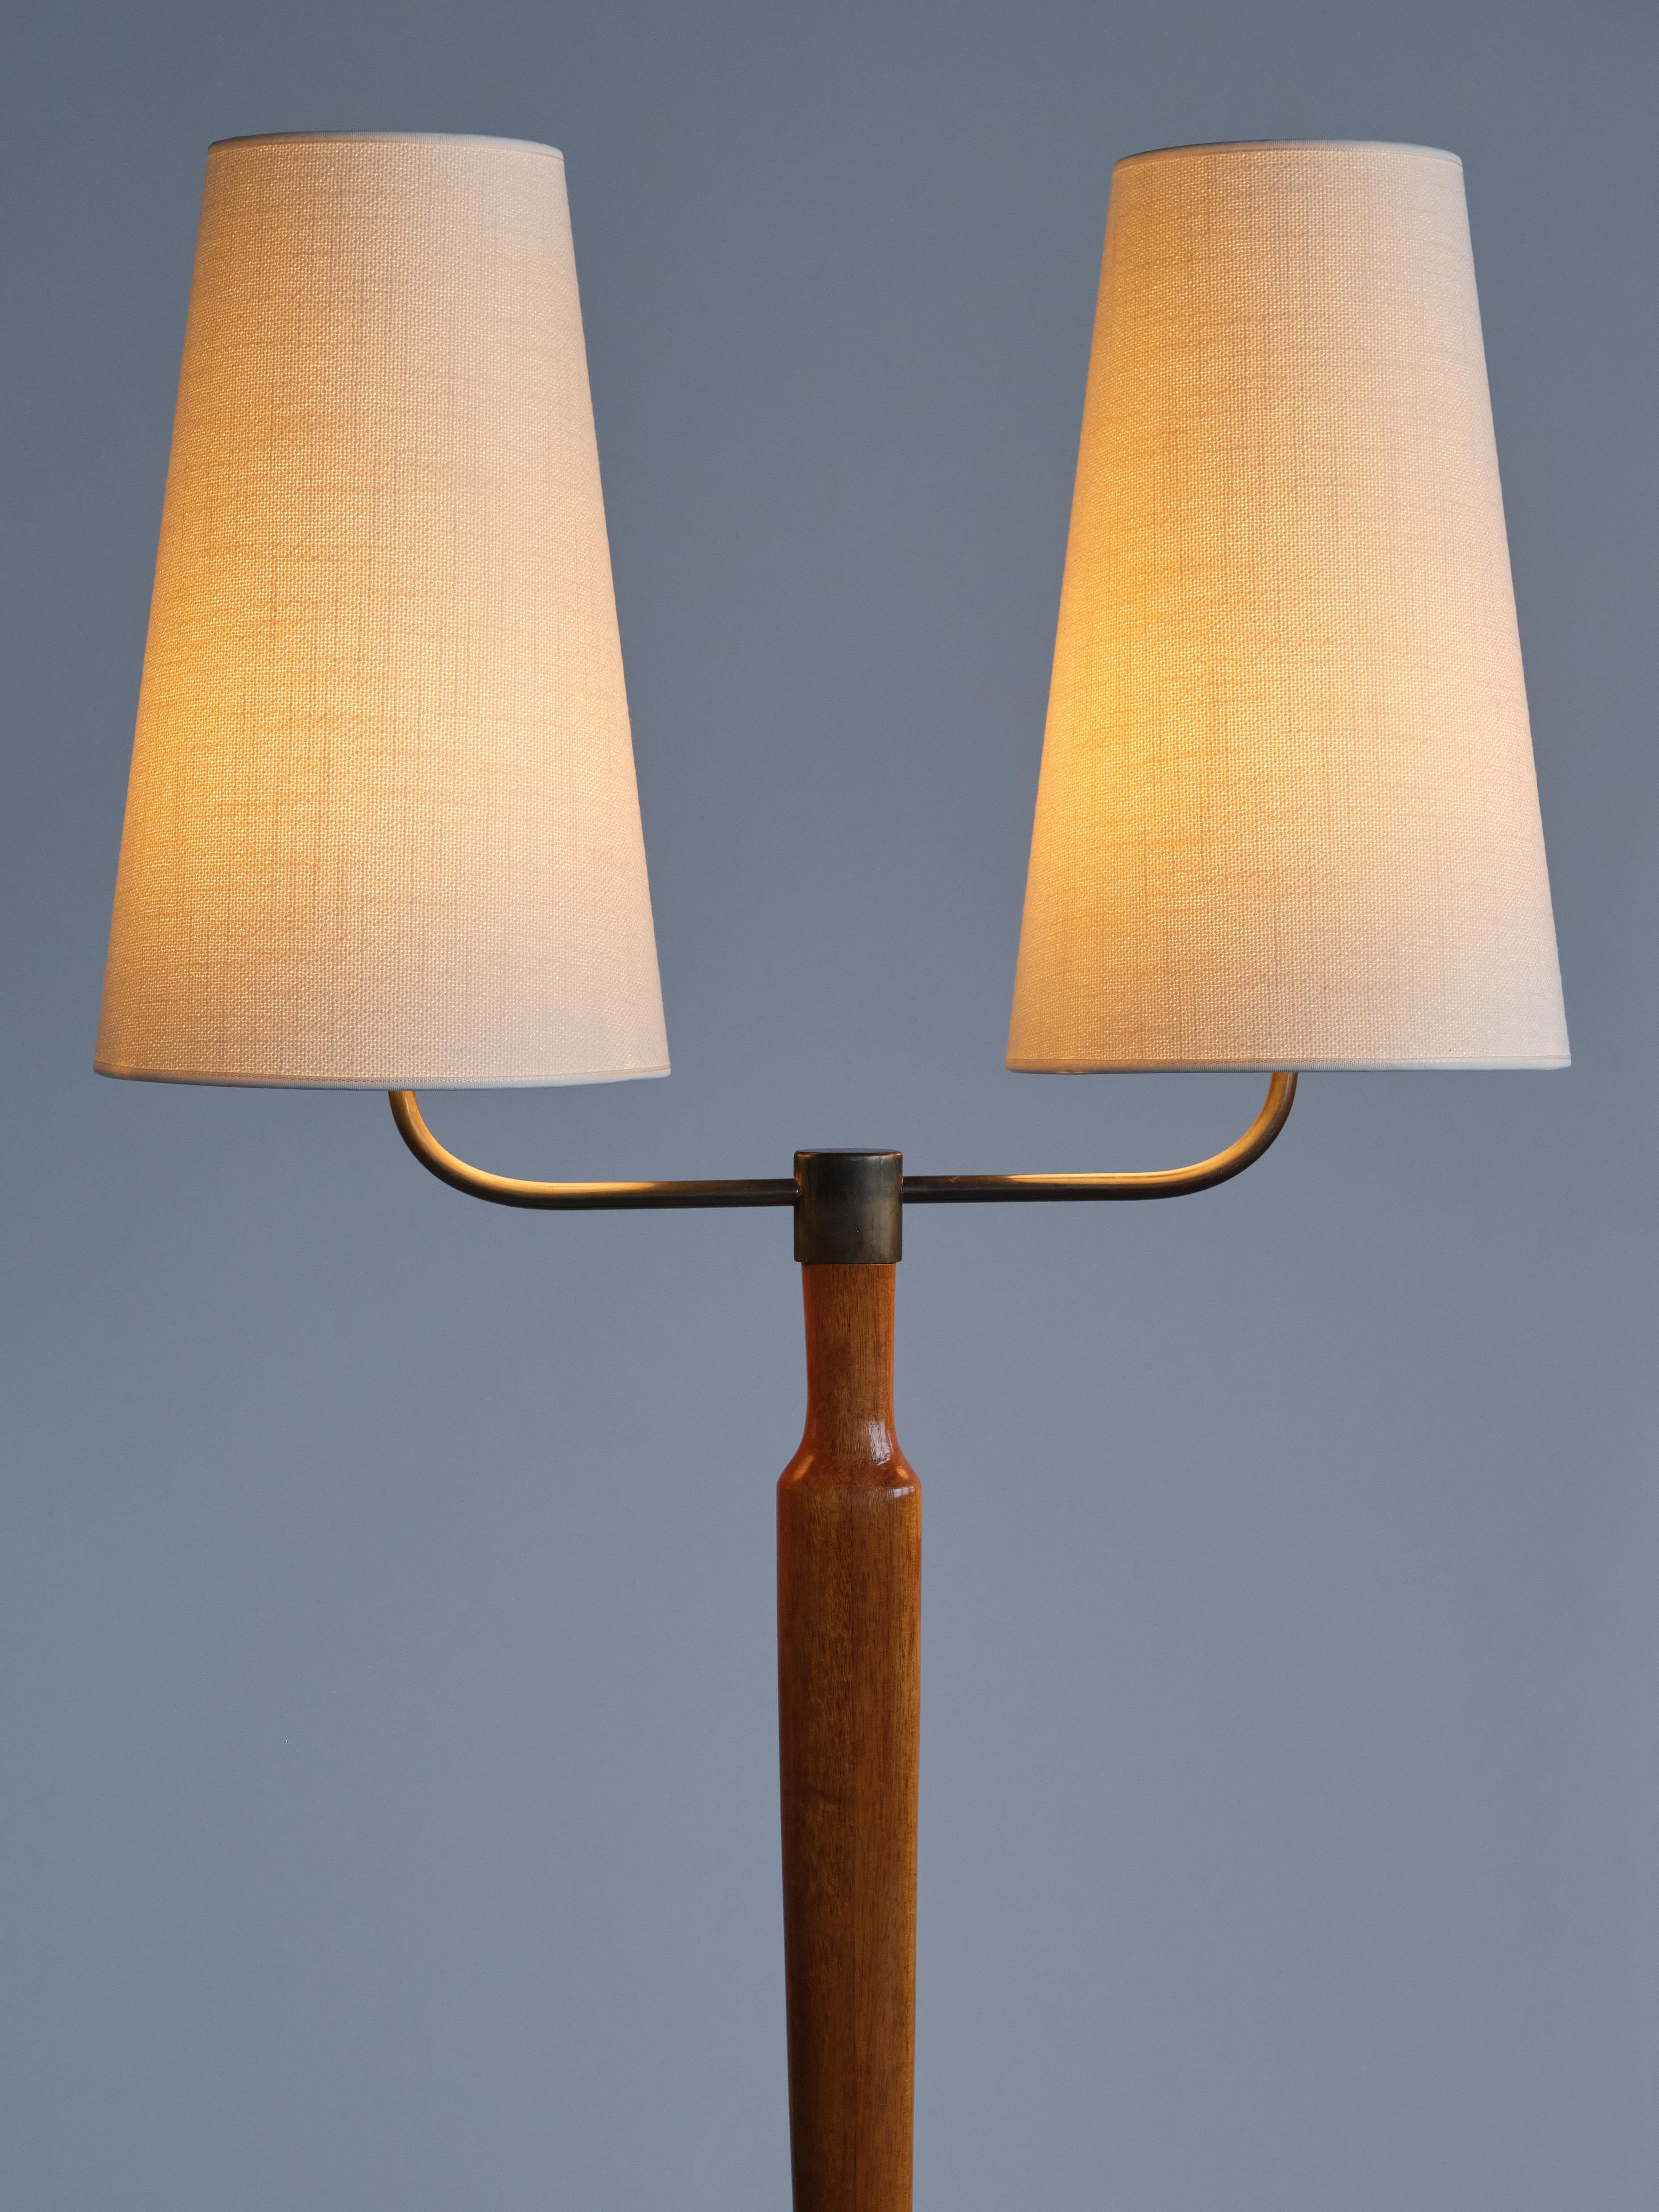 Swedish Modern Two Arm Floor Lamp in Teak Wood and Brass, Sweden, Late 1940s 1